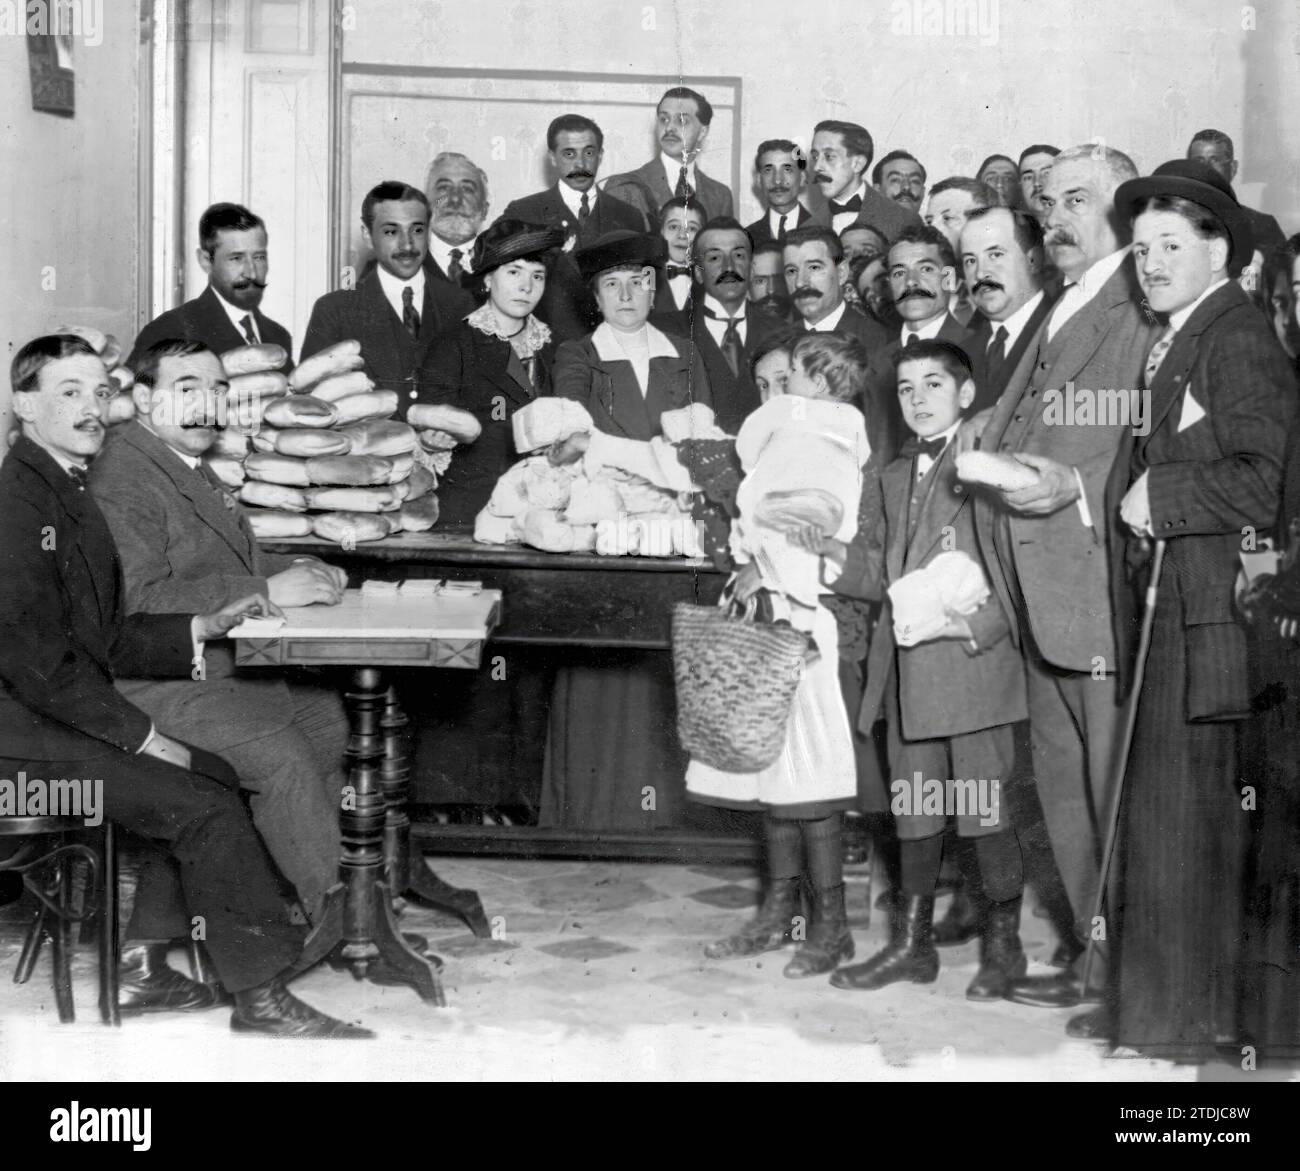 Madrid, 05/05/1915. In the Maurist center of the Inclusa district. Distribution of groceries among the poor on the occasion of the inauguration of a school for children in said location. Credit: Album / Archivo ABC / Cervera Stock Photo